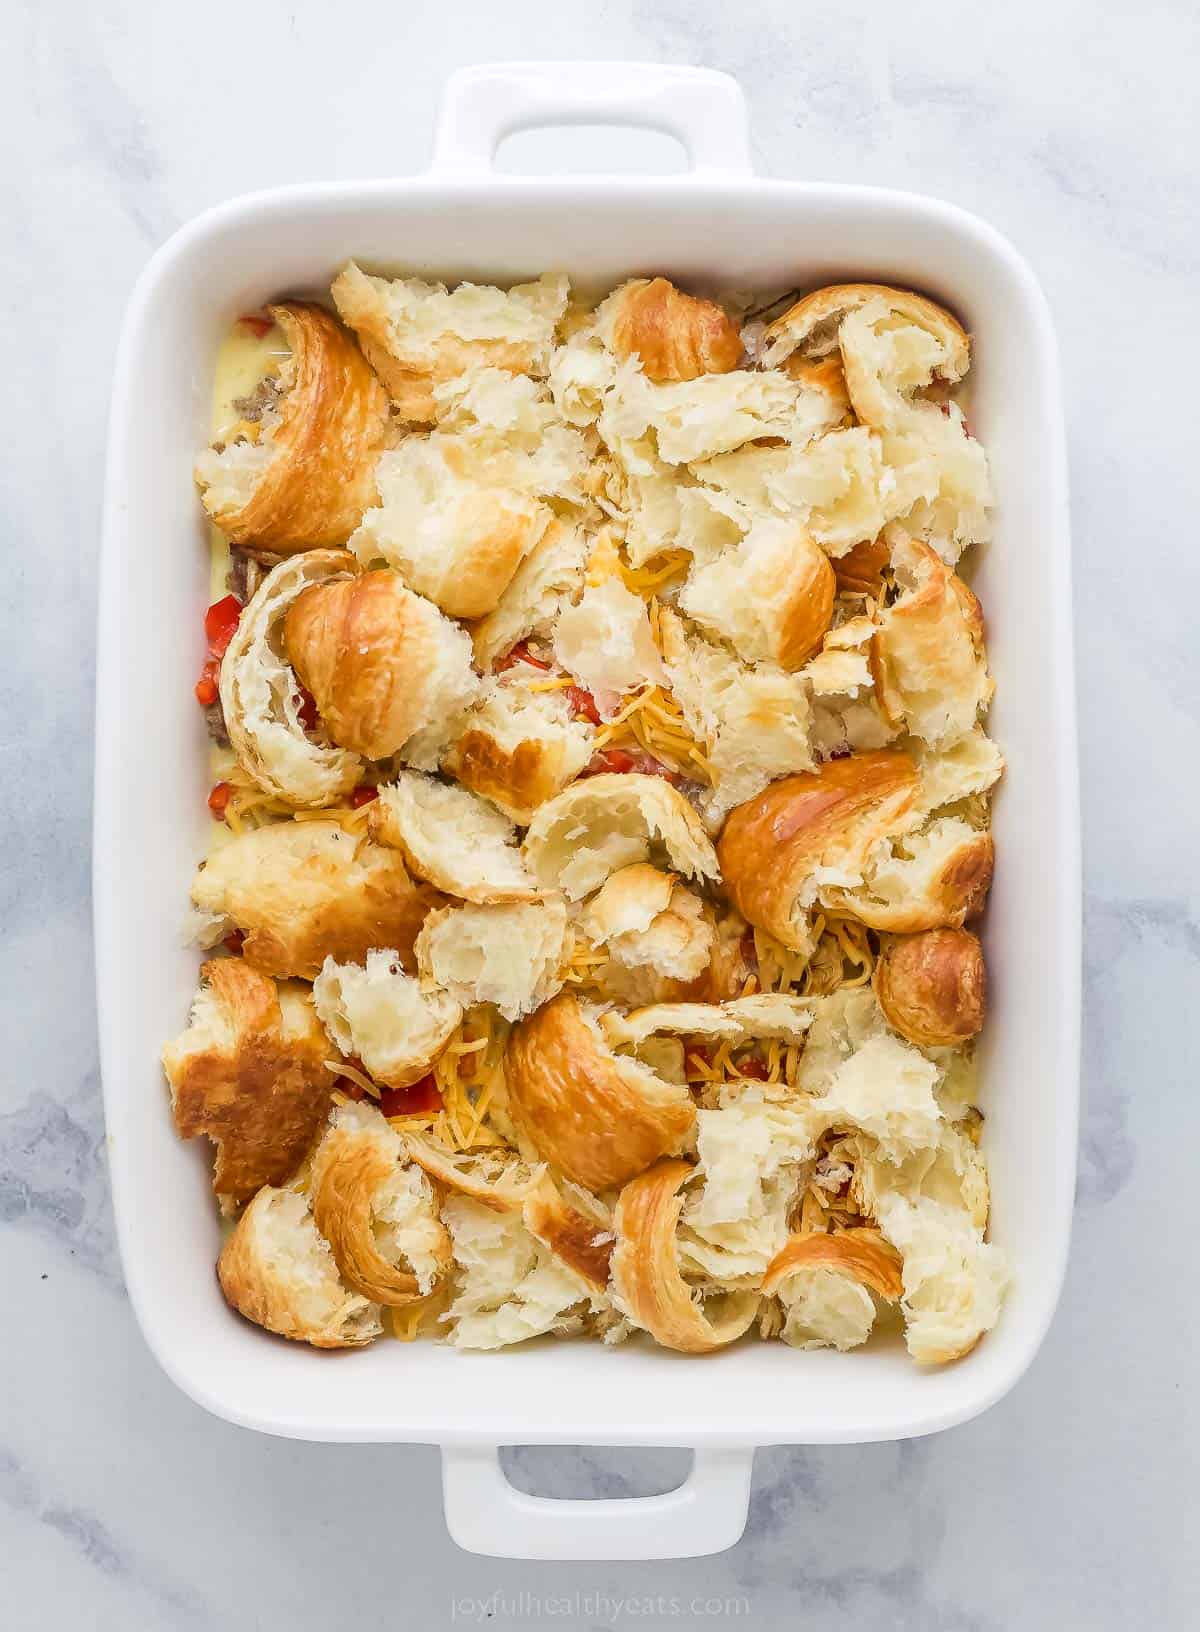 a white casserole dish with cut up croissants in it